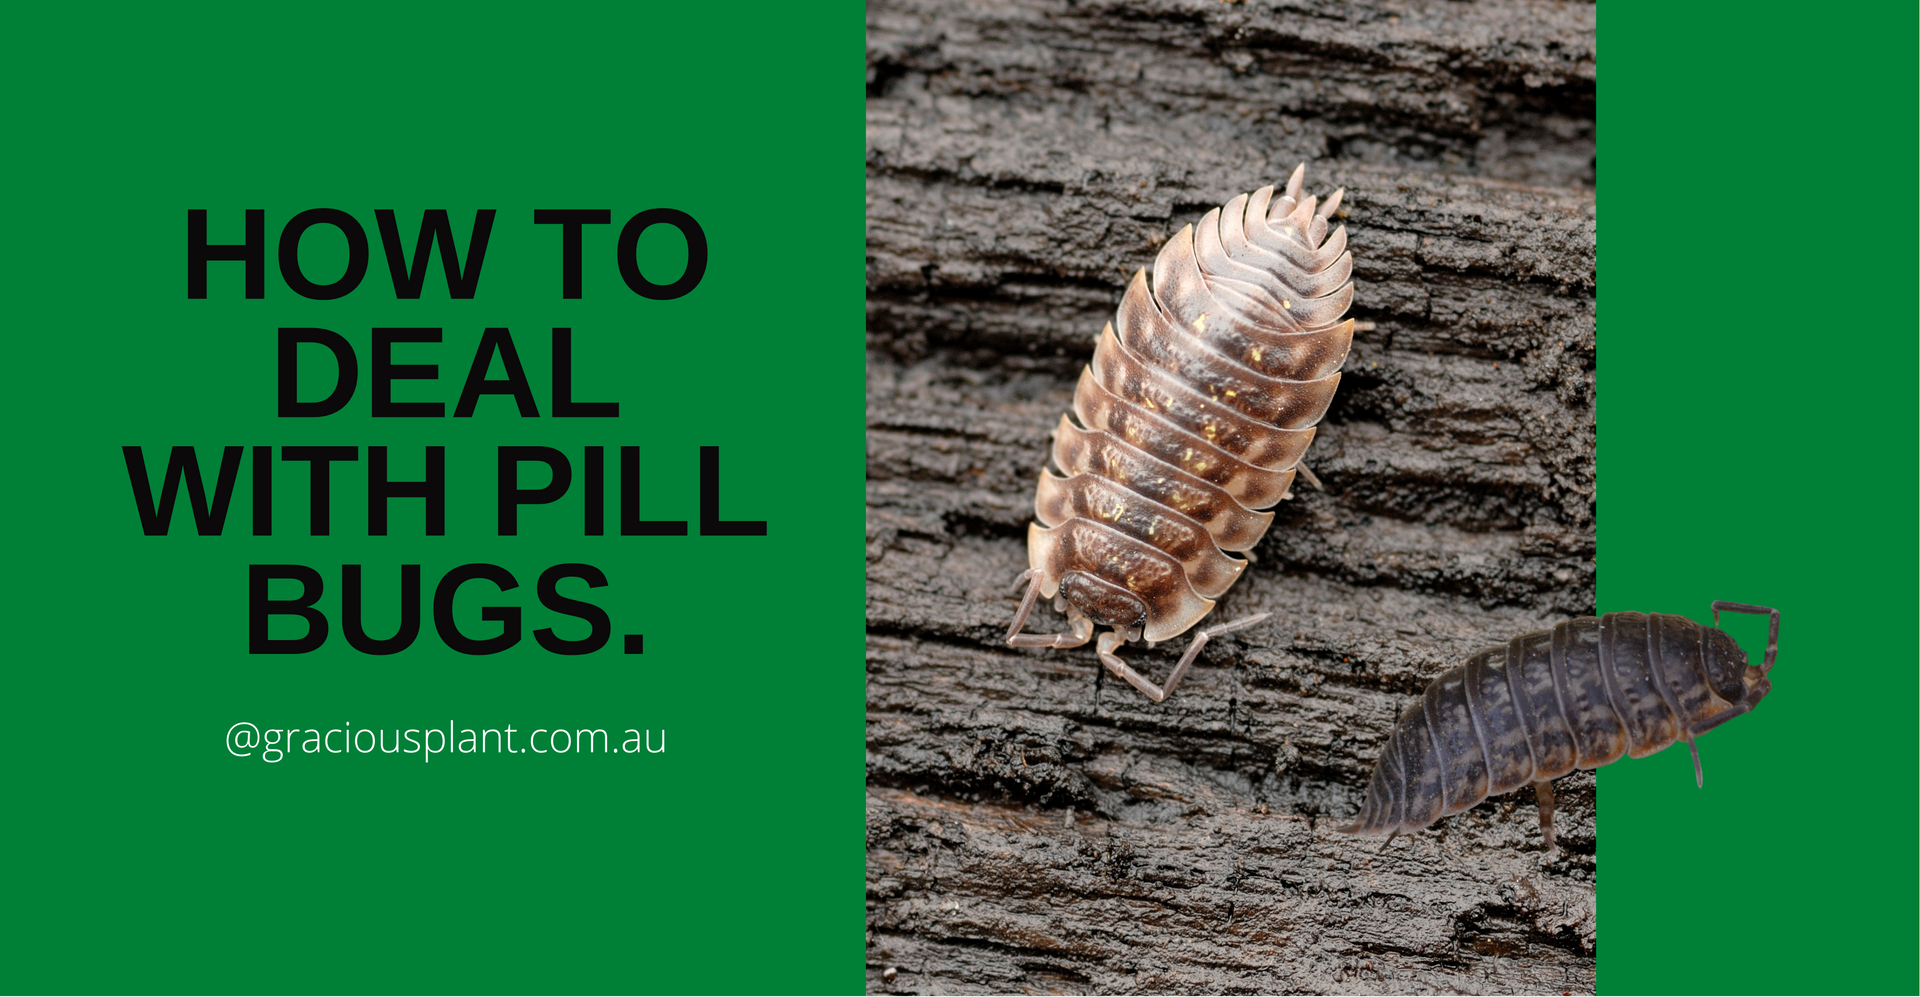 How to deal with pill bugs